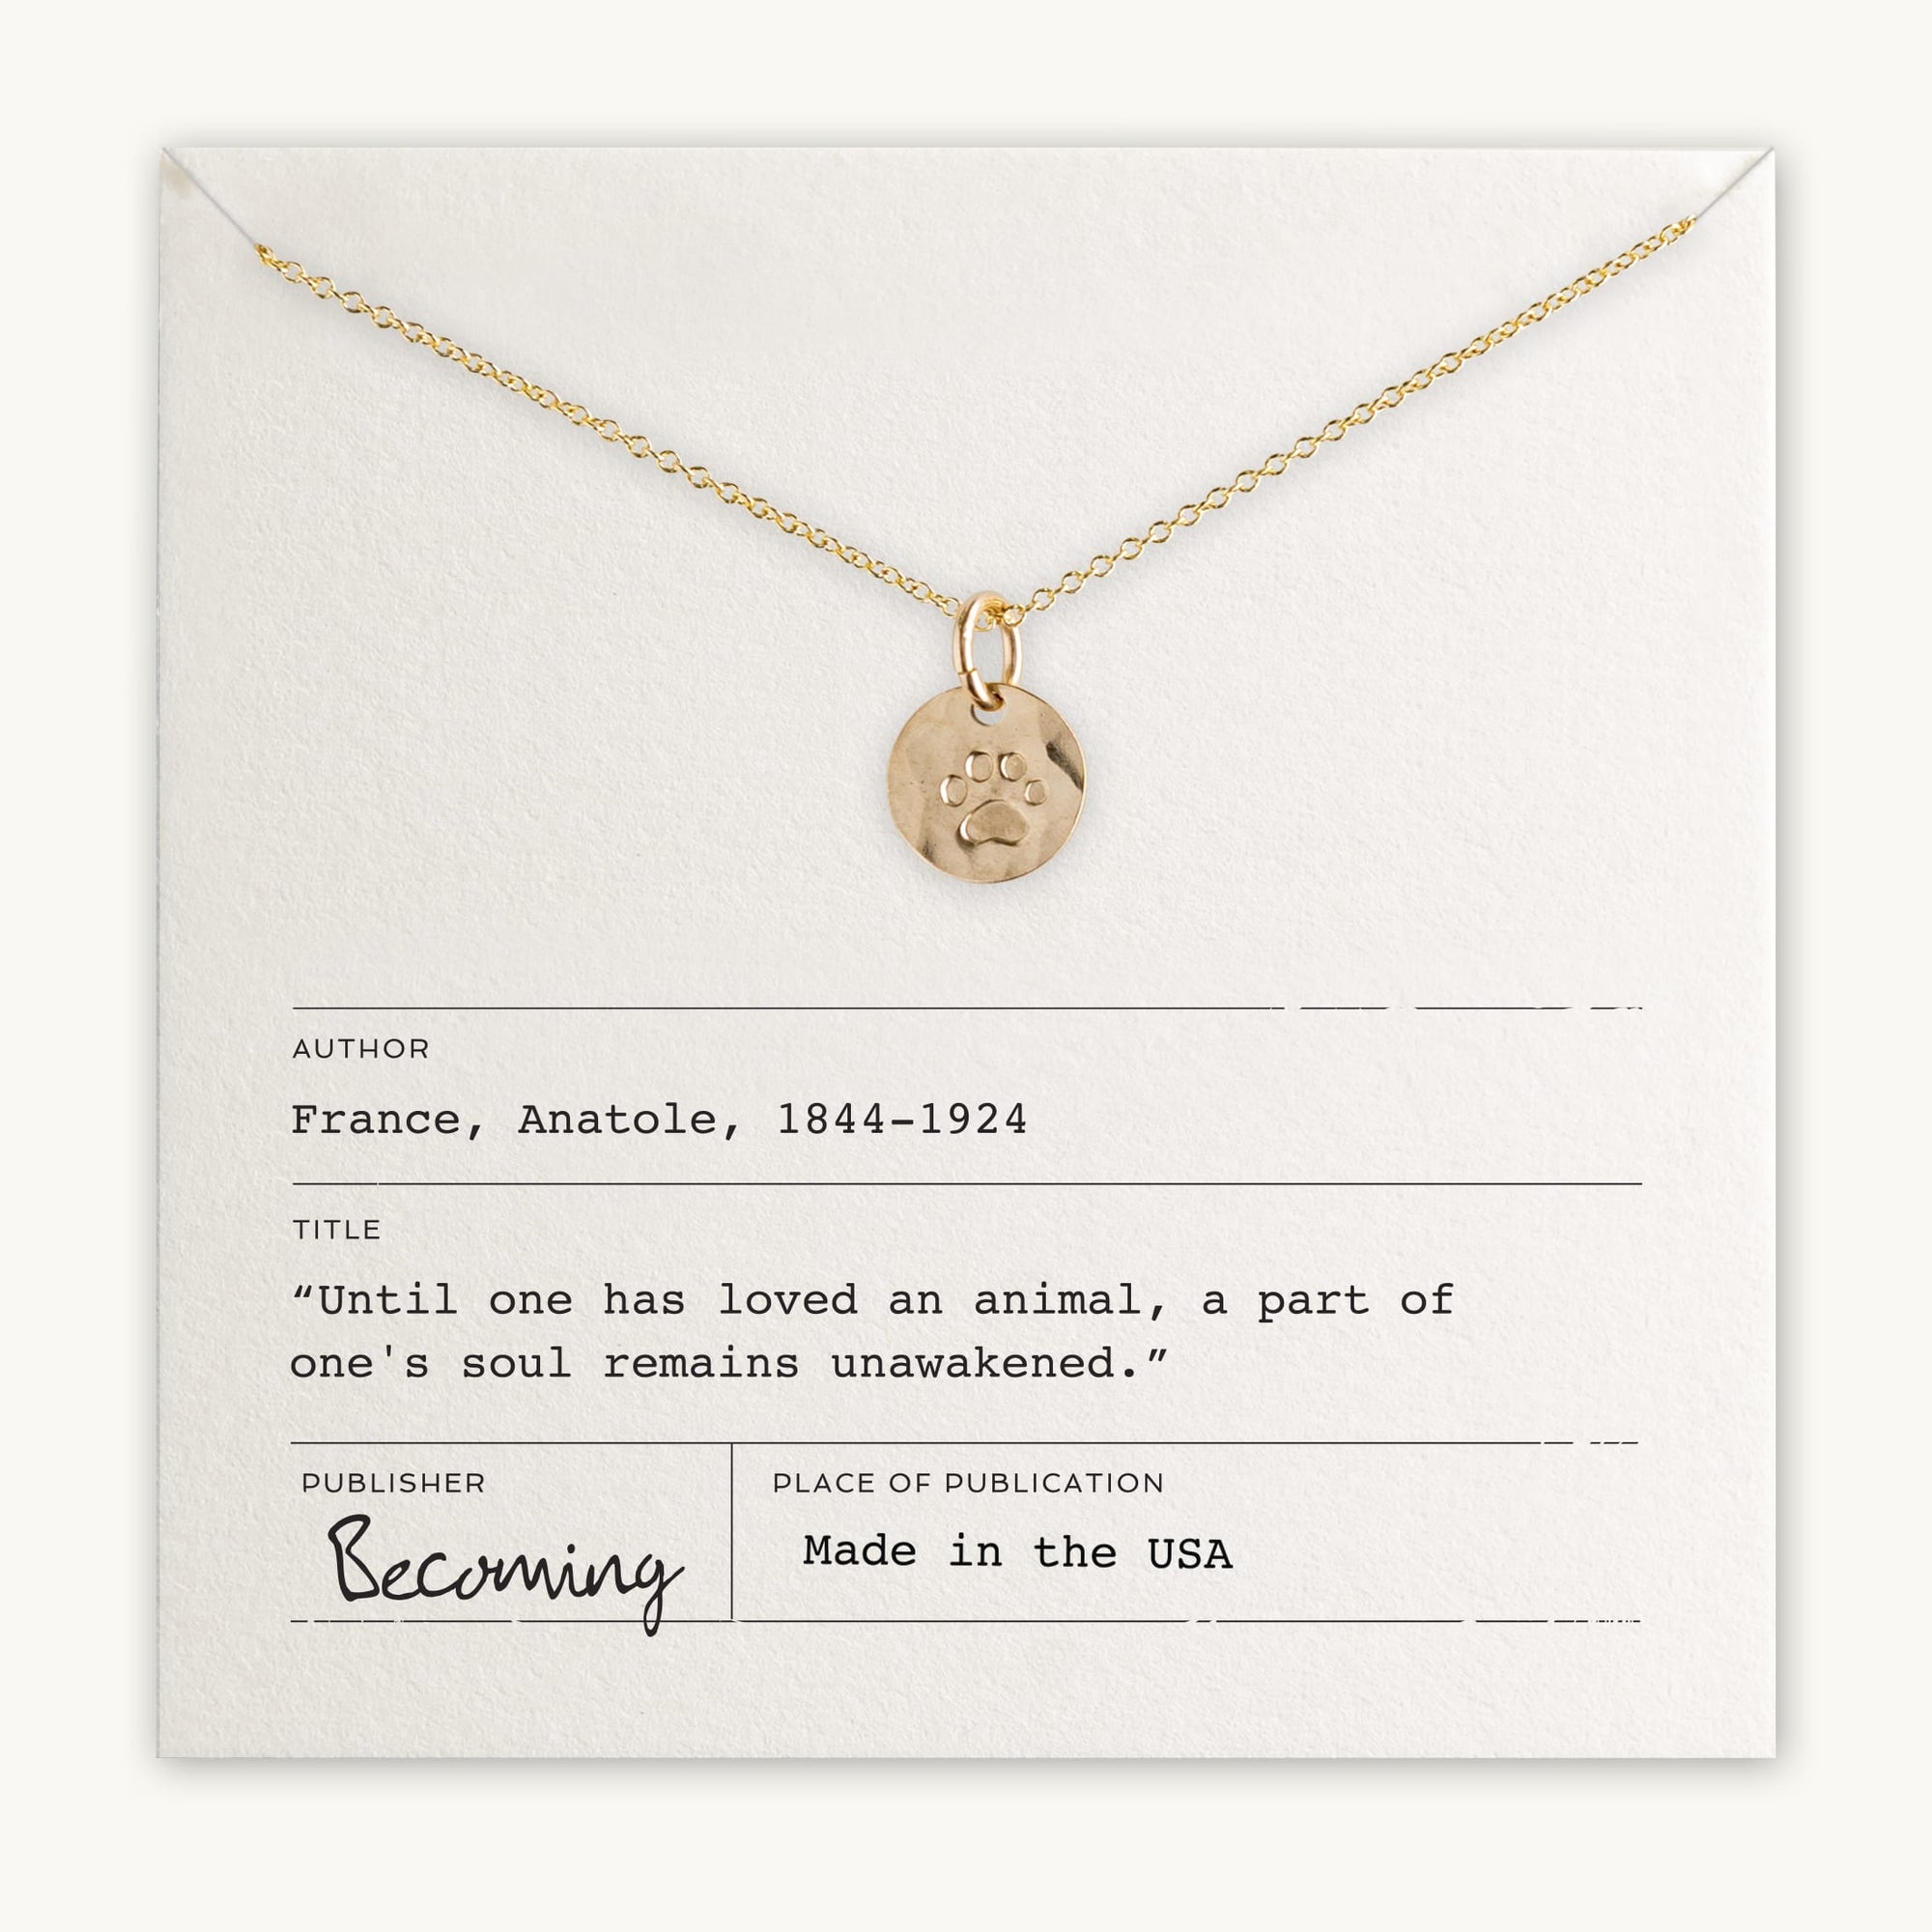 Becoming Jewelry&#39;s Paw Print Necklace displayed on a card with a quote about loving an animal, attributed to Anatole France.